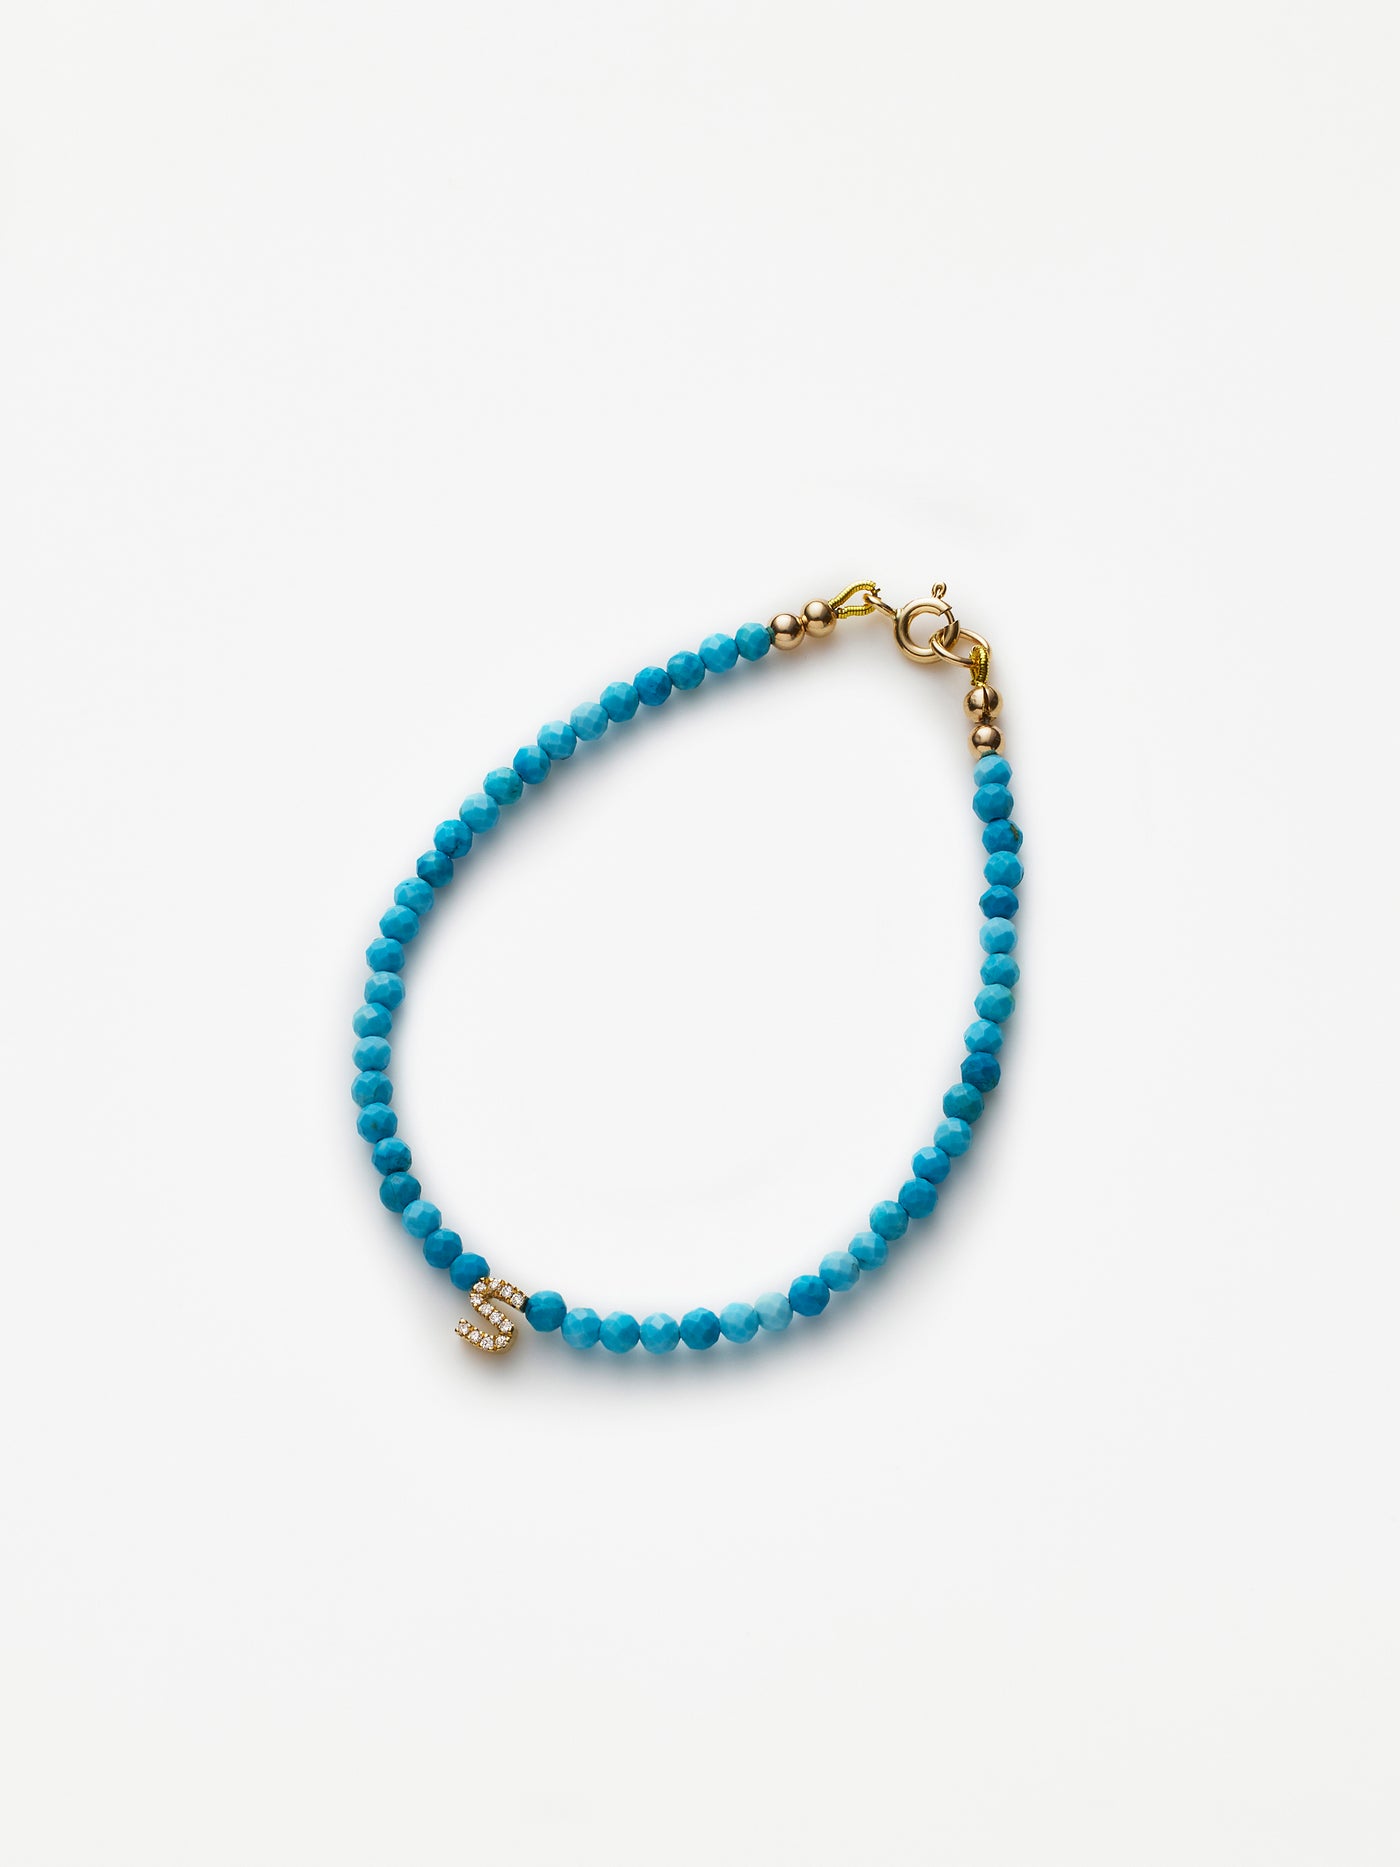 Hand-strung bracelet with natural, faceted turquoise gemstones and miniature three-dimensional diamond letter in 18k solid gold